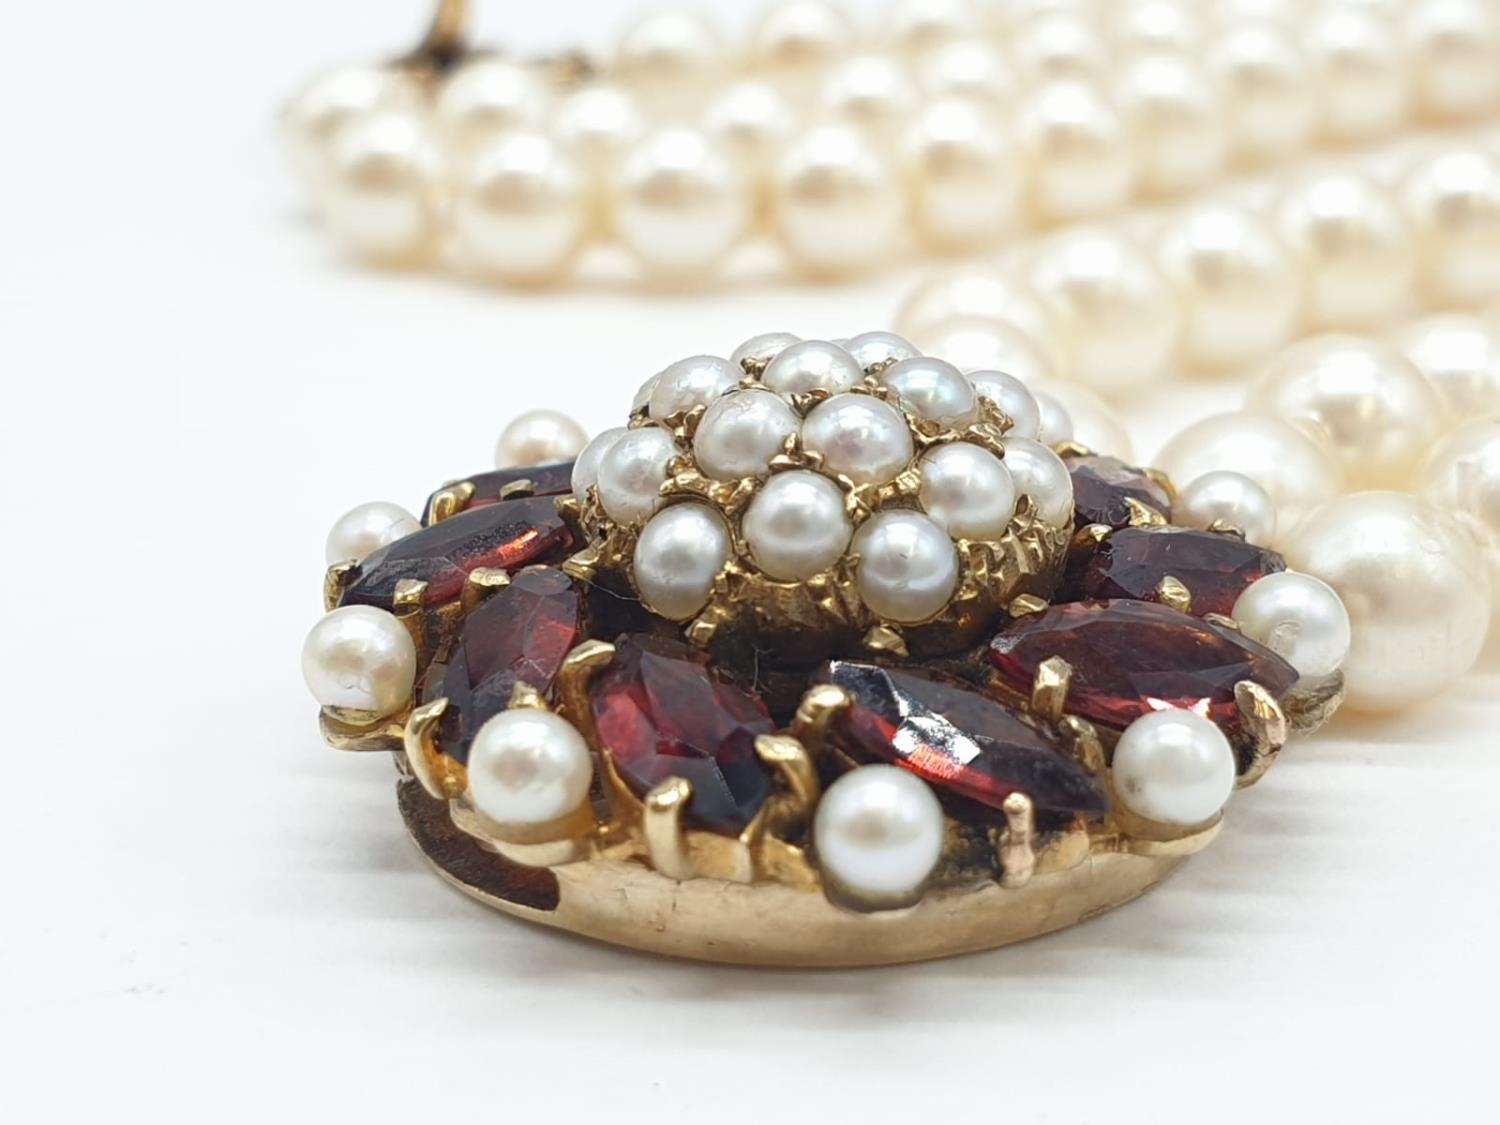 Triple row Pearl and Garnet BRACELET with 9ct Gold Clasp. 37.3g 18cm - Image 7 of 16